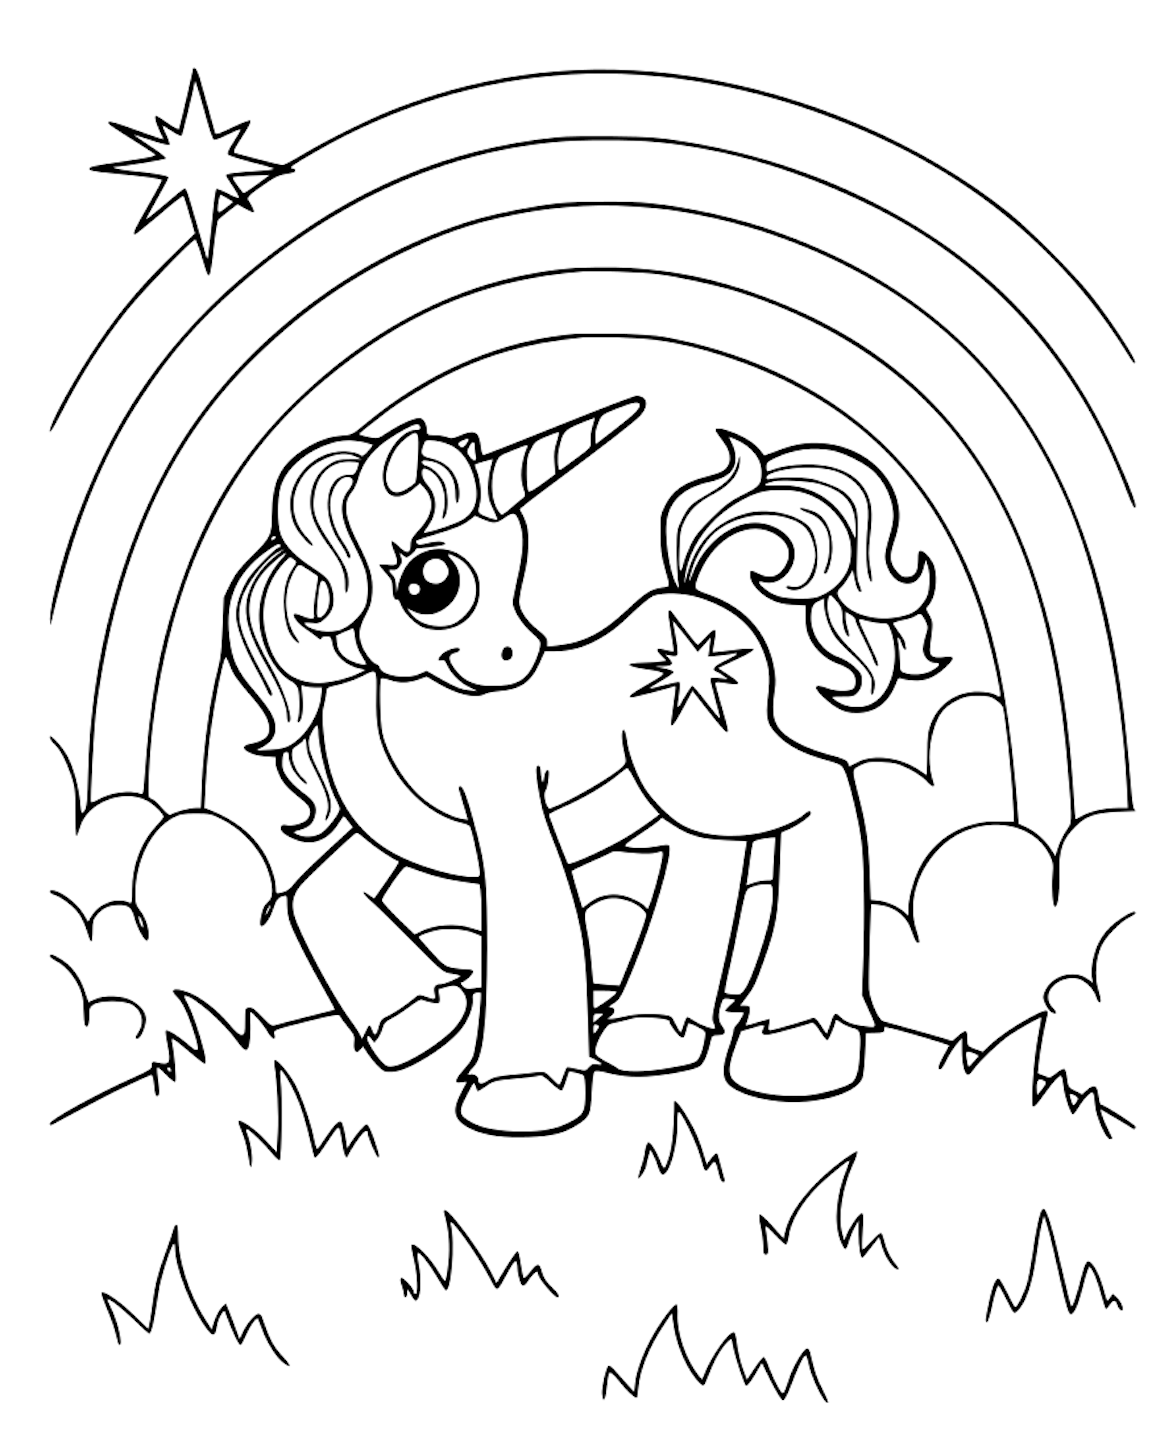 Cute Unicorn Coloring Pages And Other Top 10 Coloring Themes